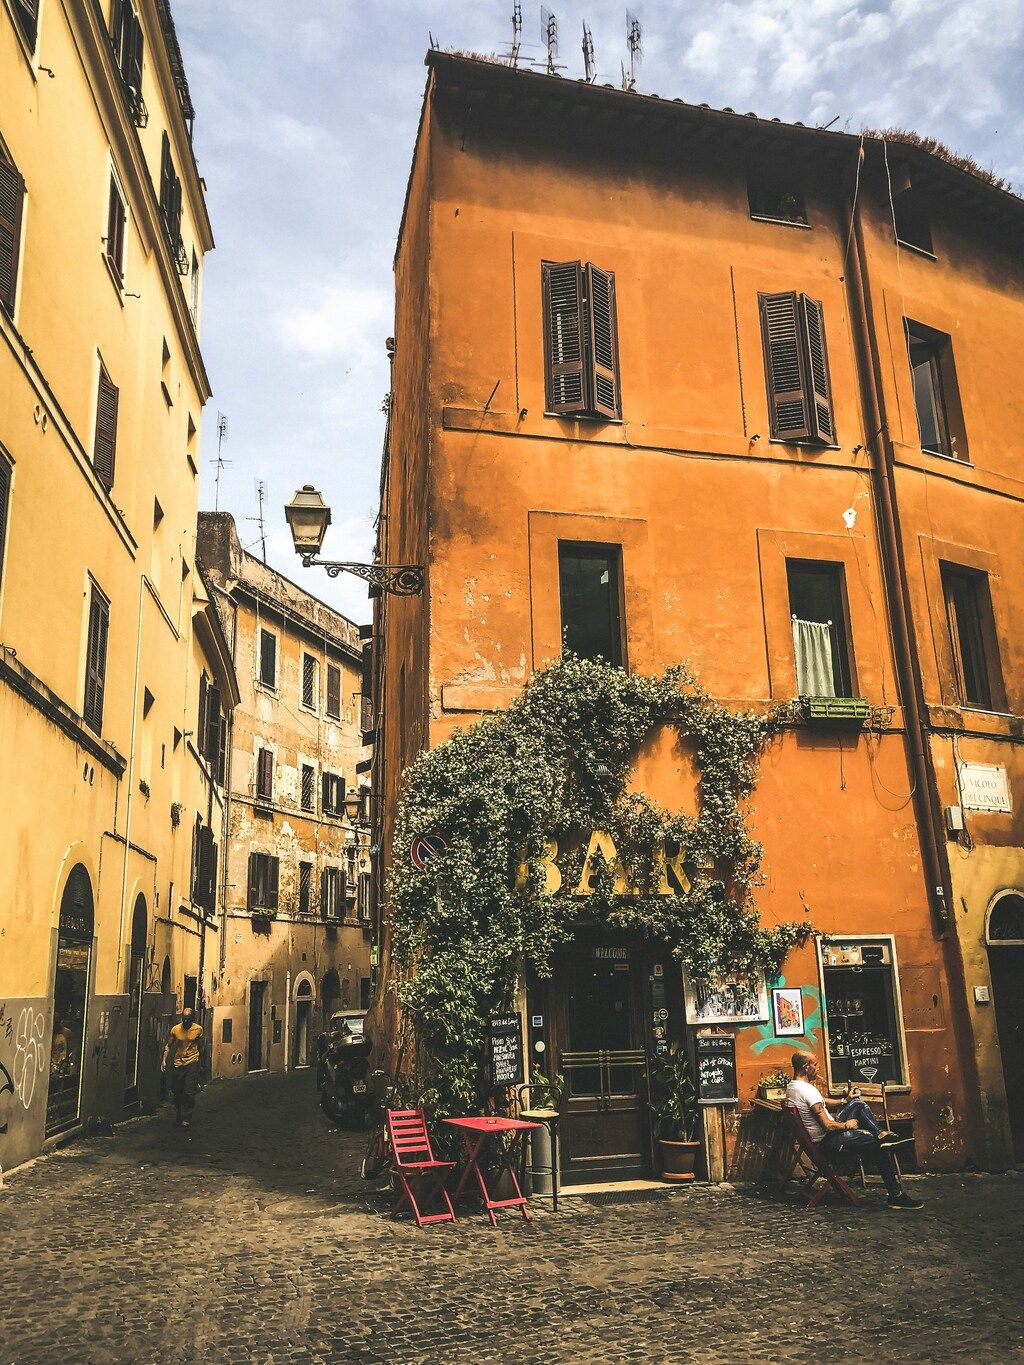 Charming street of in Rome with an orange building adorned by greenery and a small bar